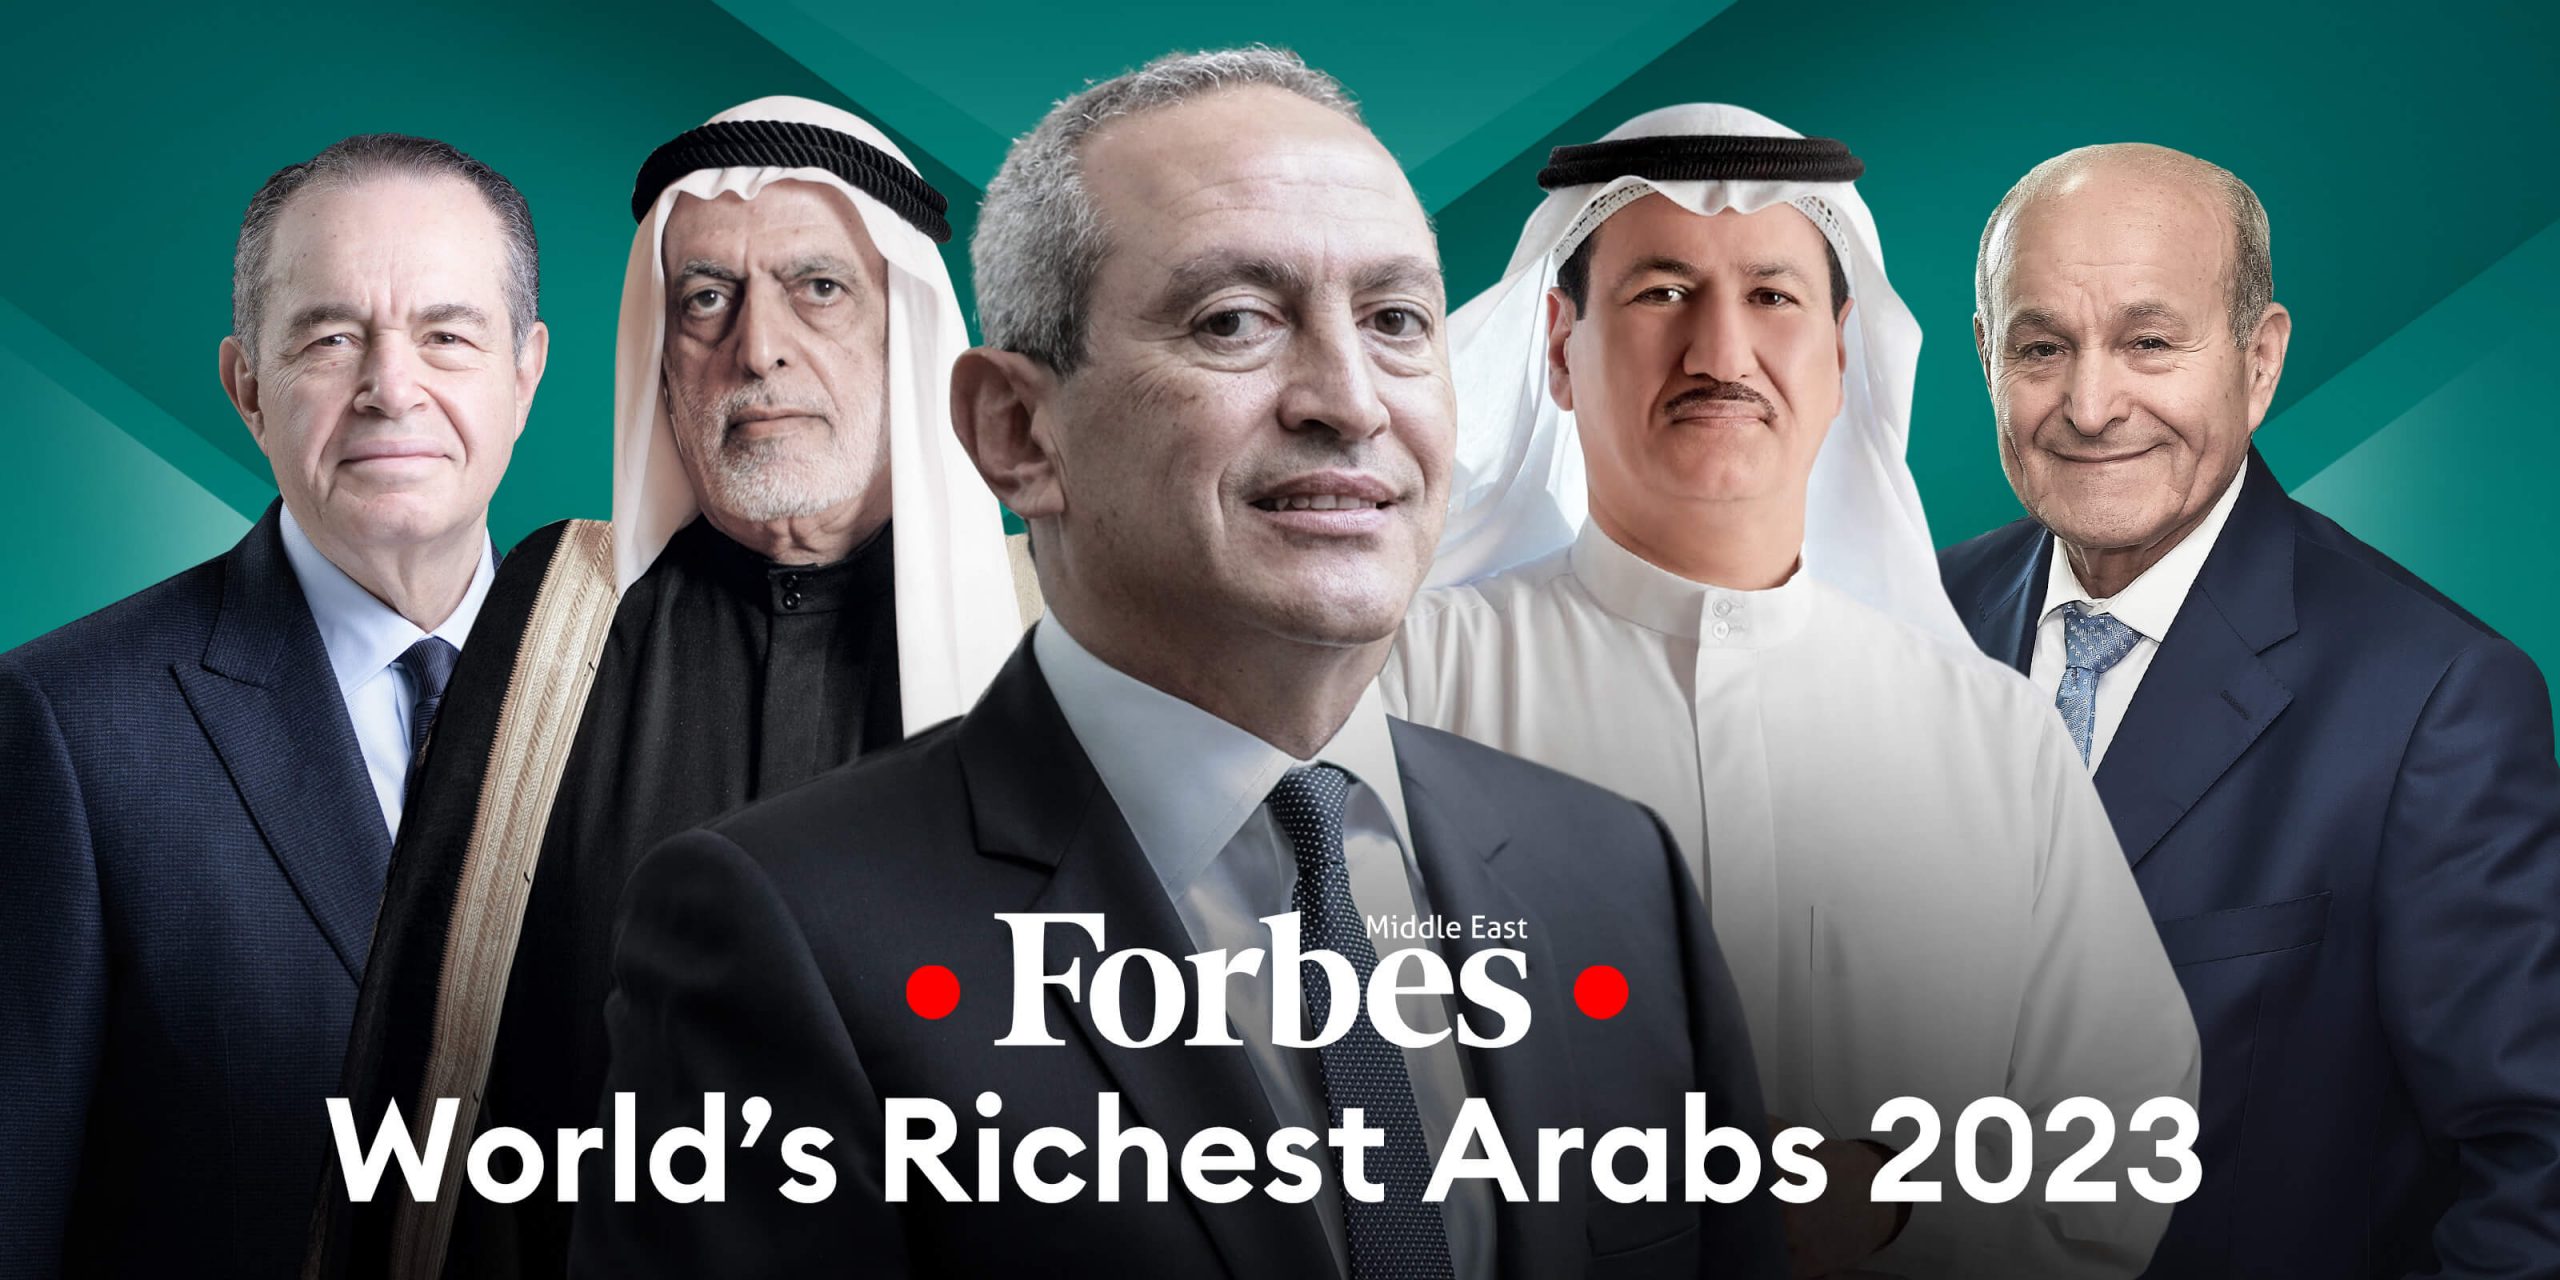 Countries Around the World Ranked by the Net Worth of Their Richest Person